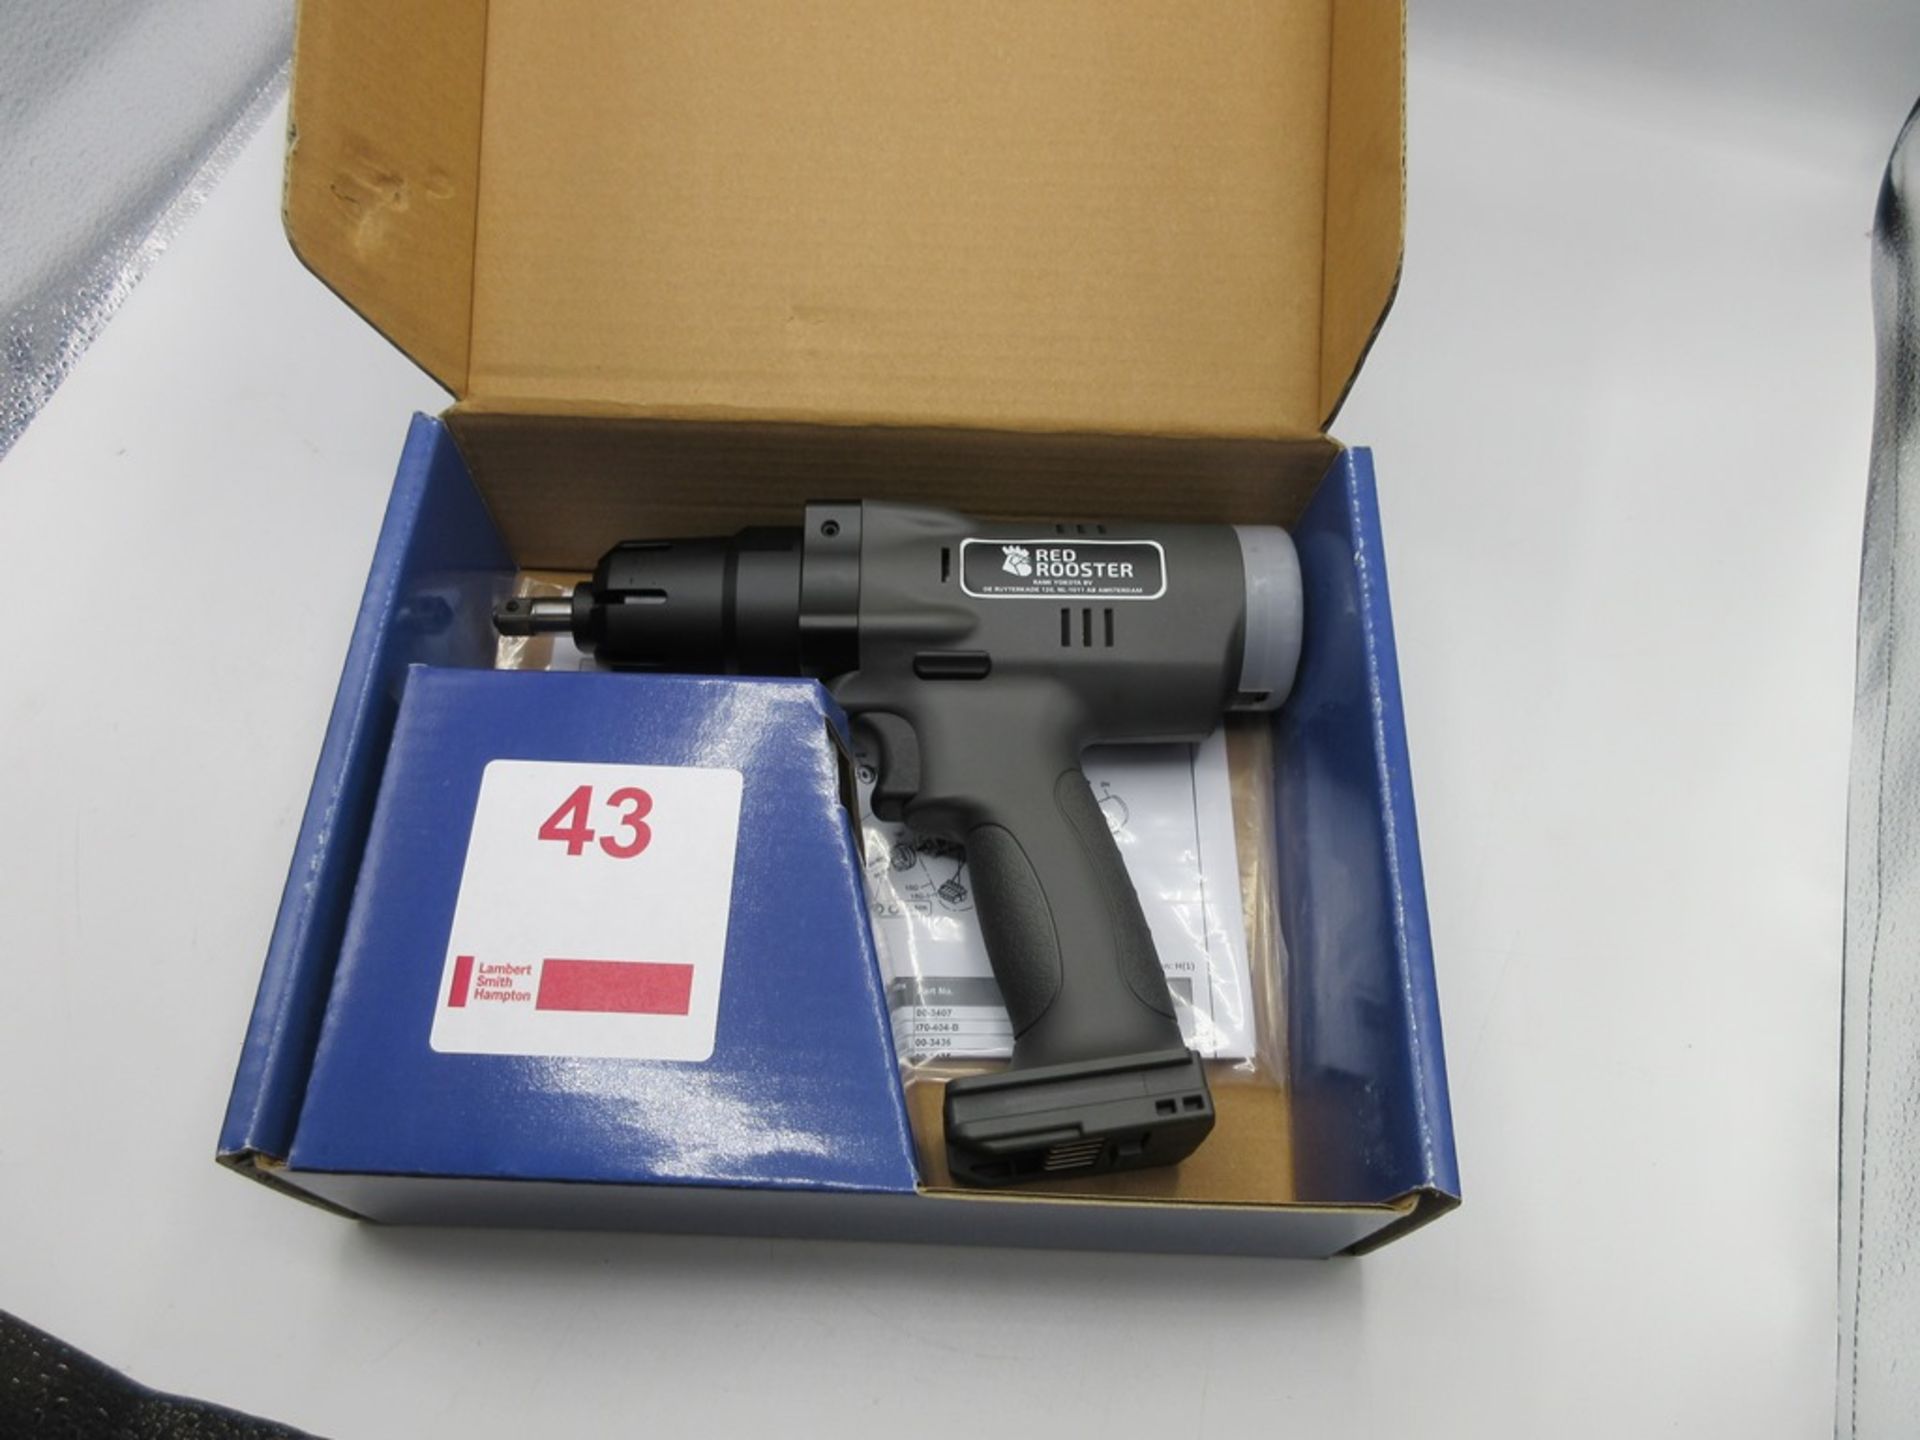 Red Rooster Cordless Impulse Wrench, Model RRI-BIM35T, no battery - unused